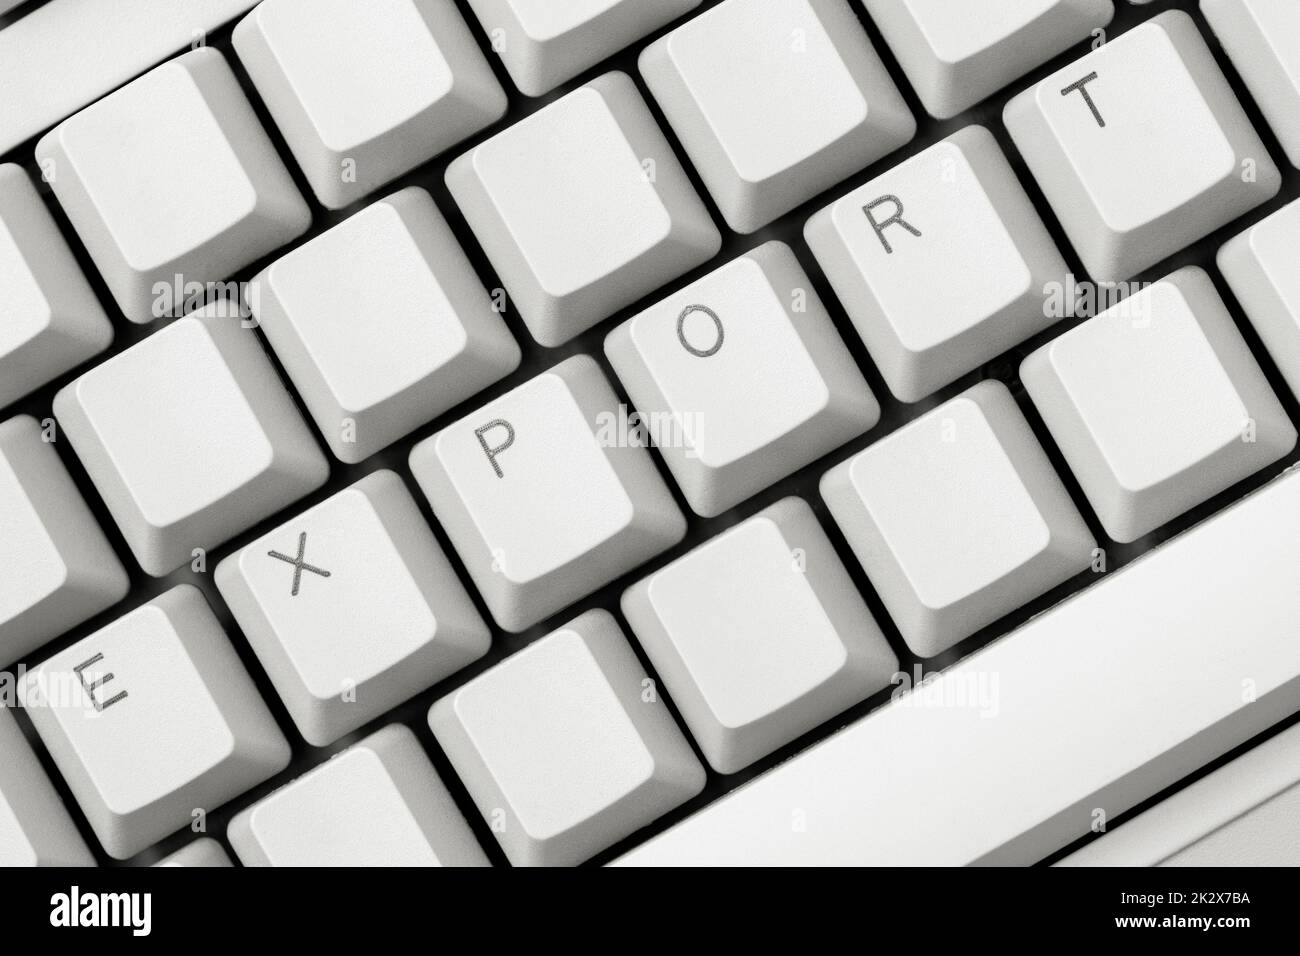 EXPORT write on the white computer keyboard Stock Photo